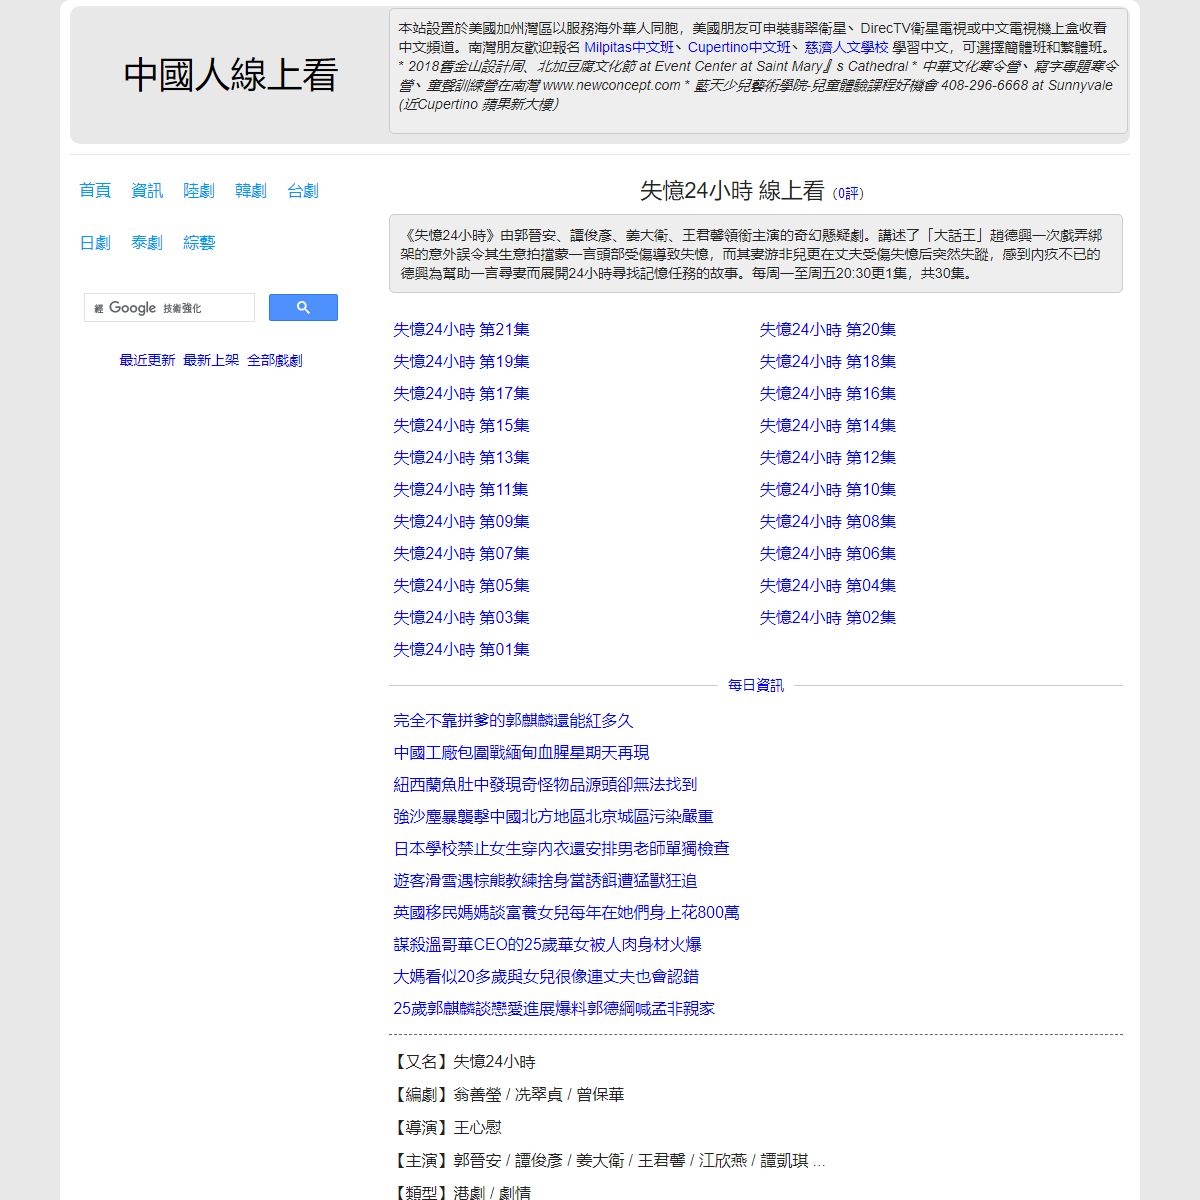 A complete backup of https://chinaq.tv/hk210225/